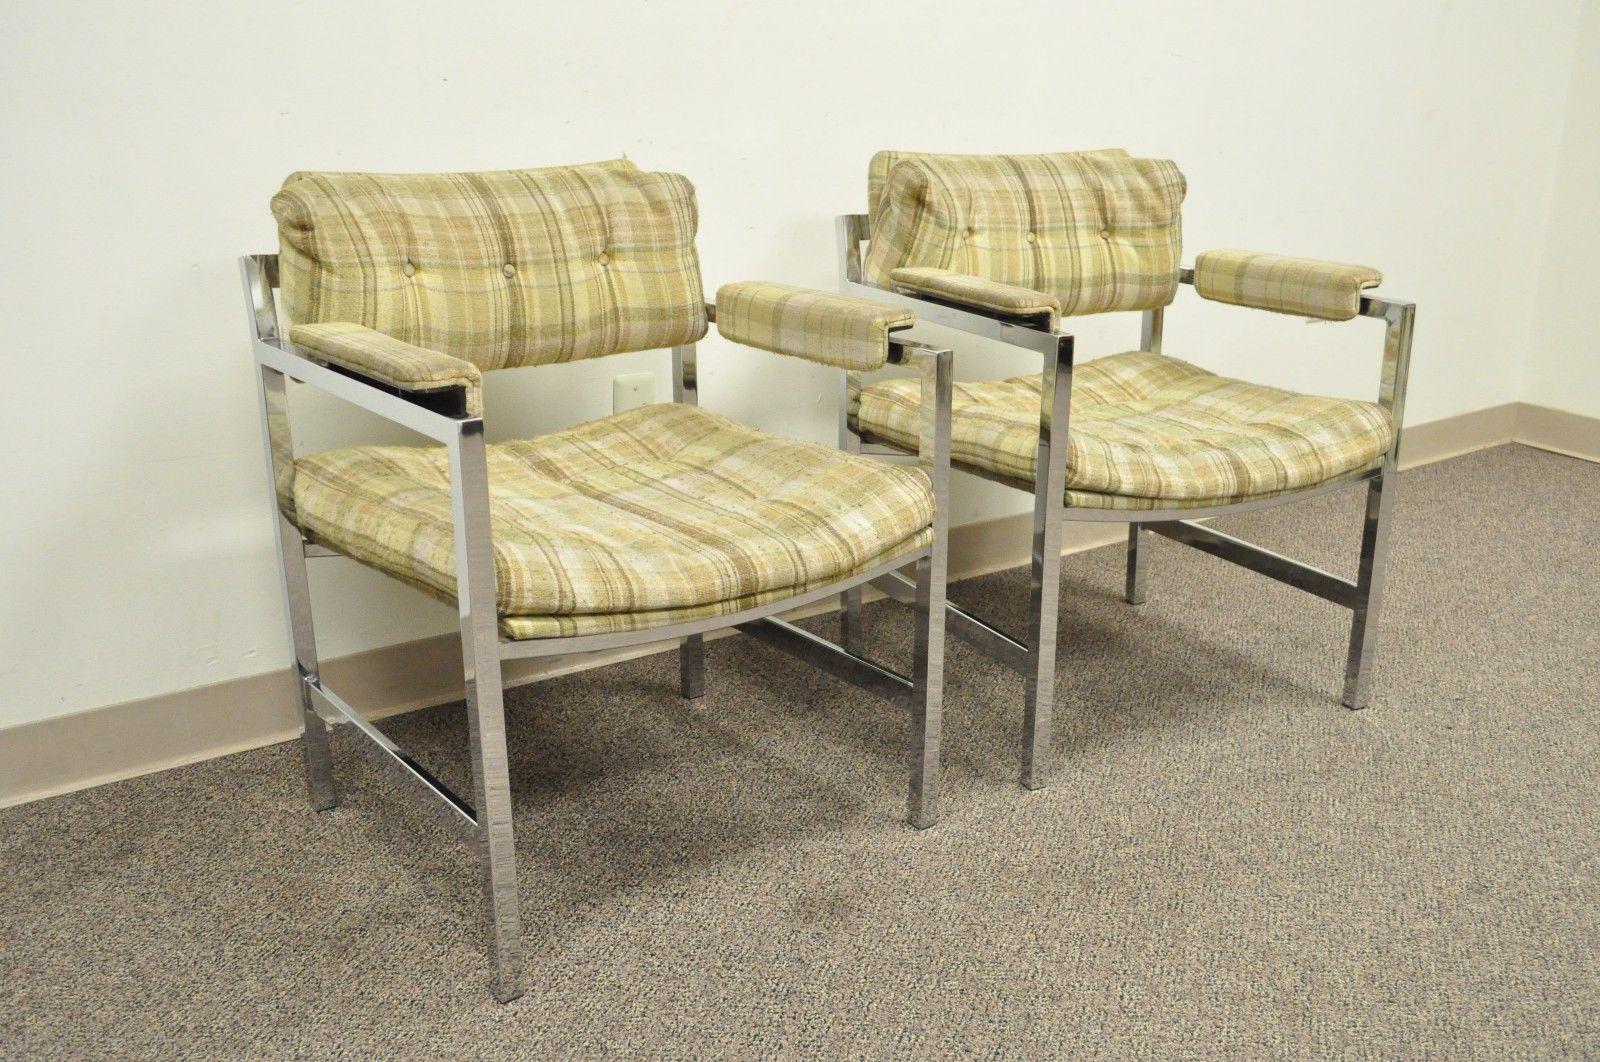 Pair of Mid-Century Modern Baughman Chrome Floating Arm Lounge Chairs 7